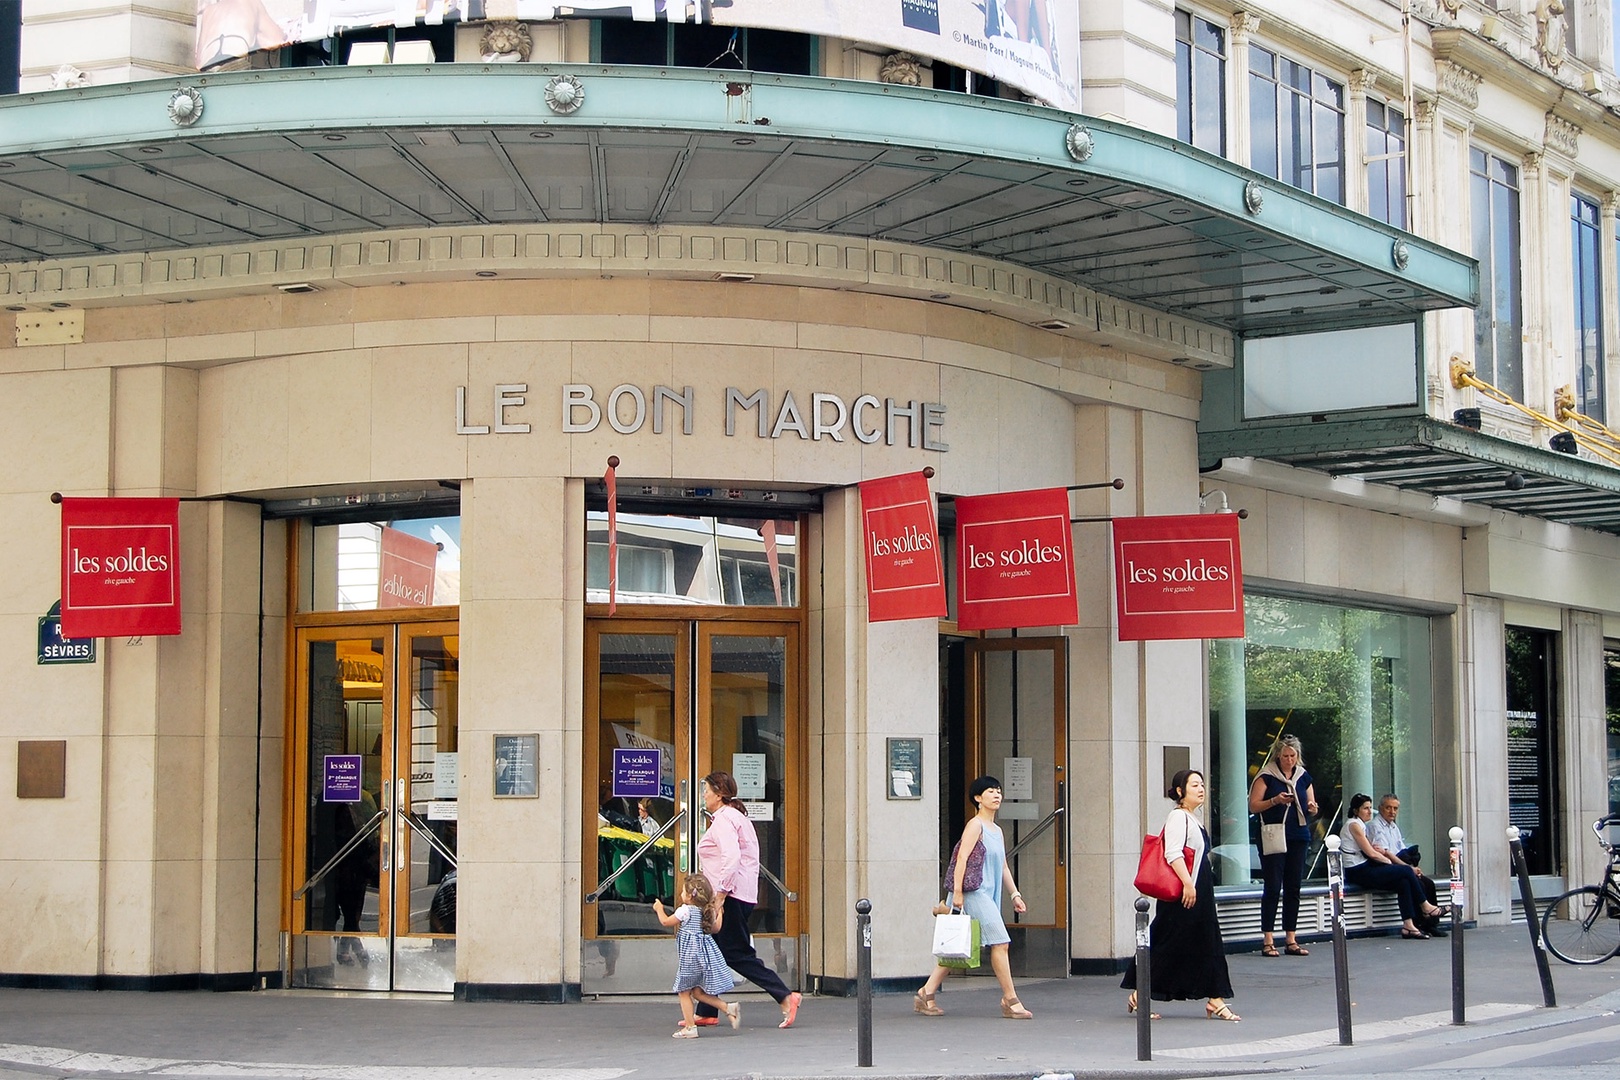 You'll be just down the road from the iconic Le Bon Marche department store.